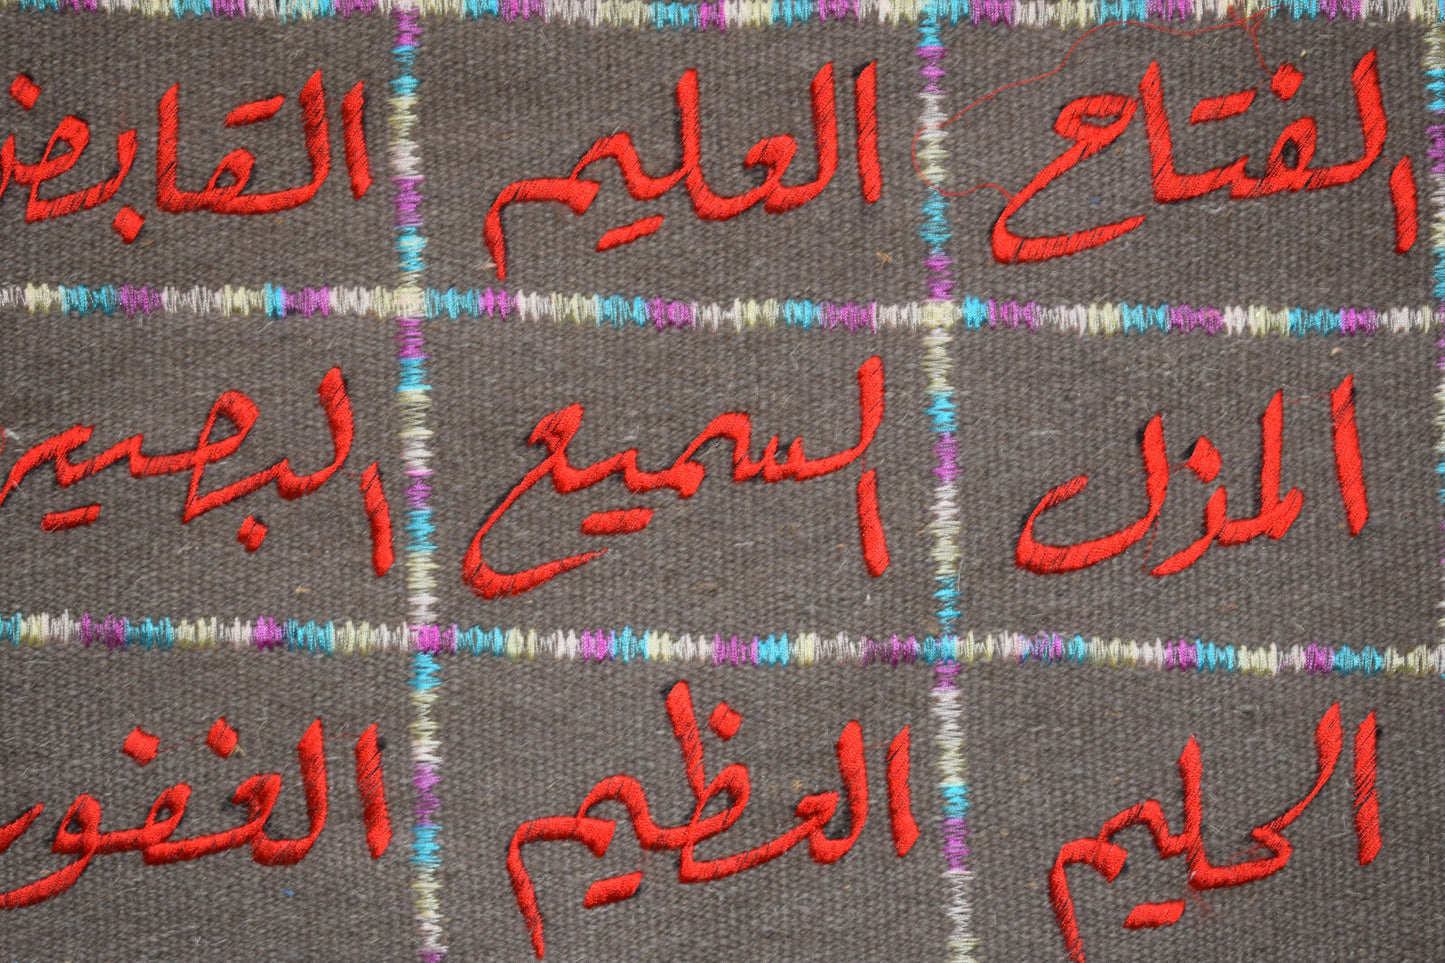 Islamic 99 names of Allah wall hanging tapestry -Wall Covering